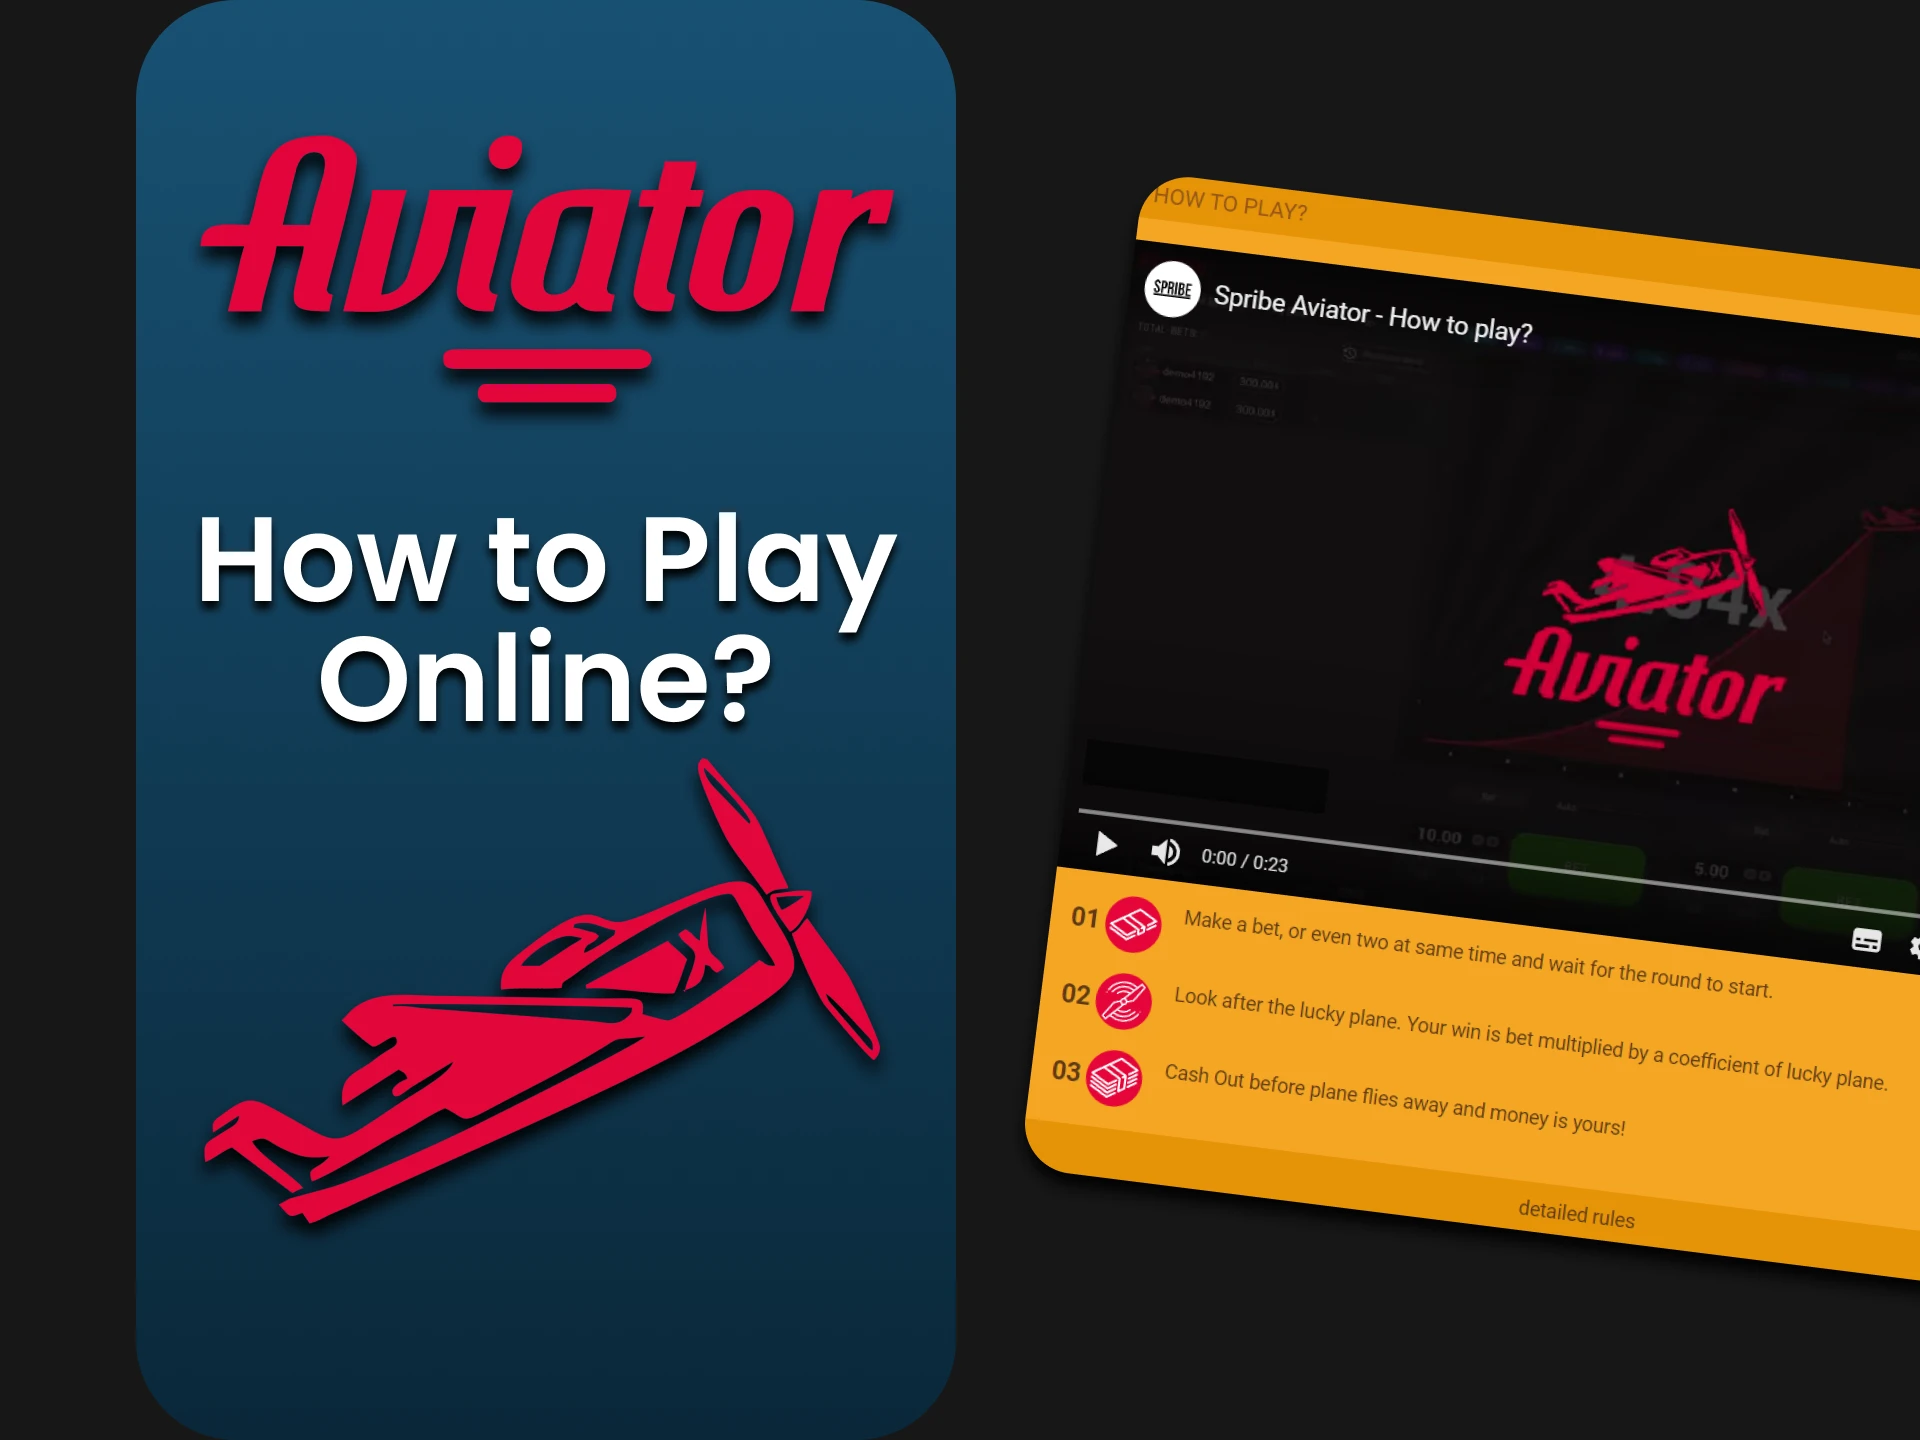 We will show you how to start playing the demo version of Aviator.